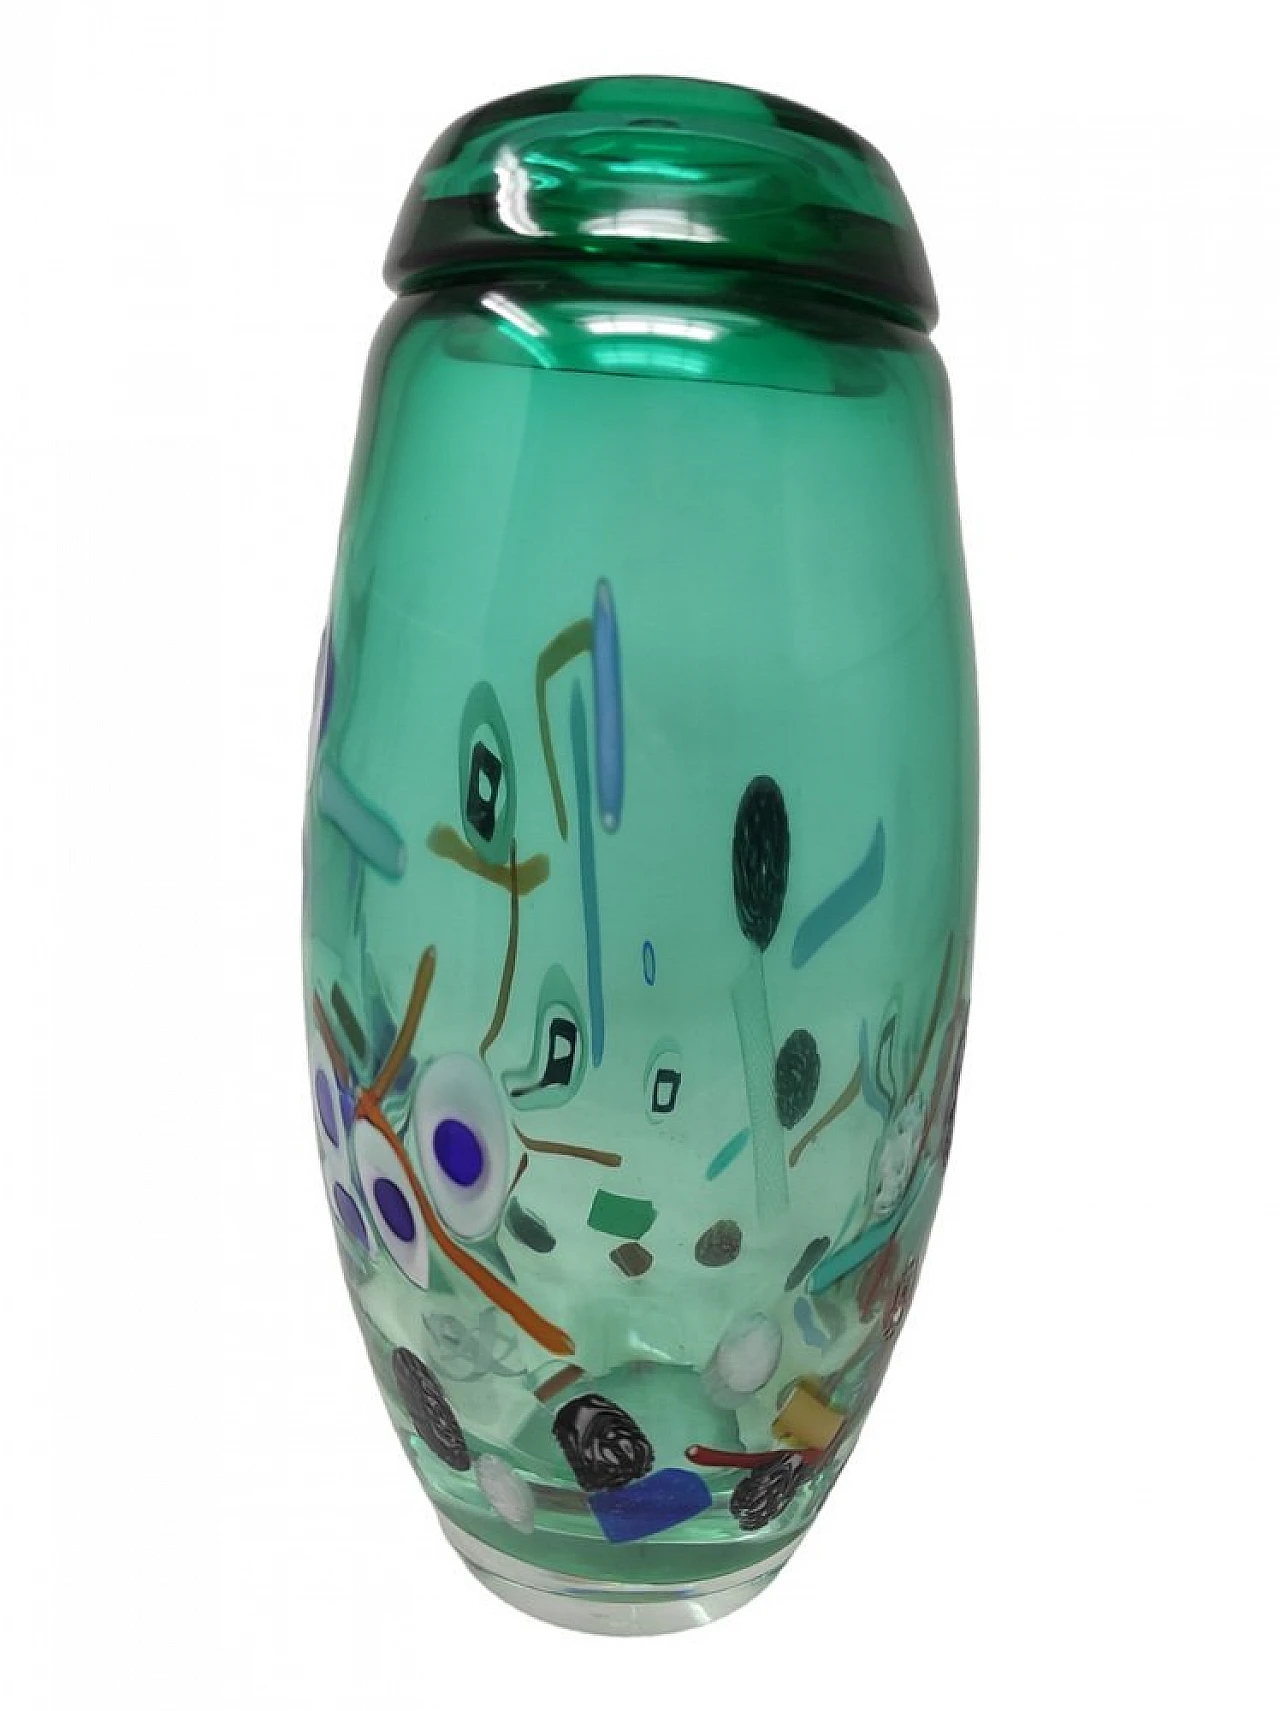 Teal Murano glass vase by M. Costantini, 1998 4